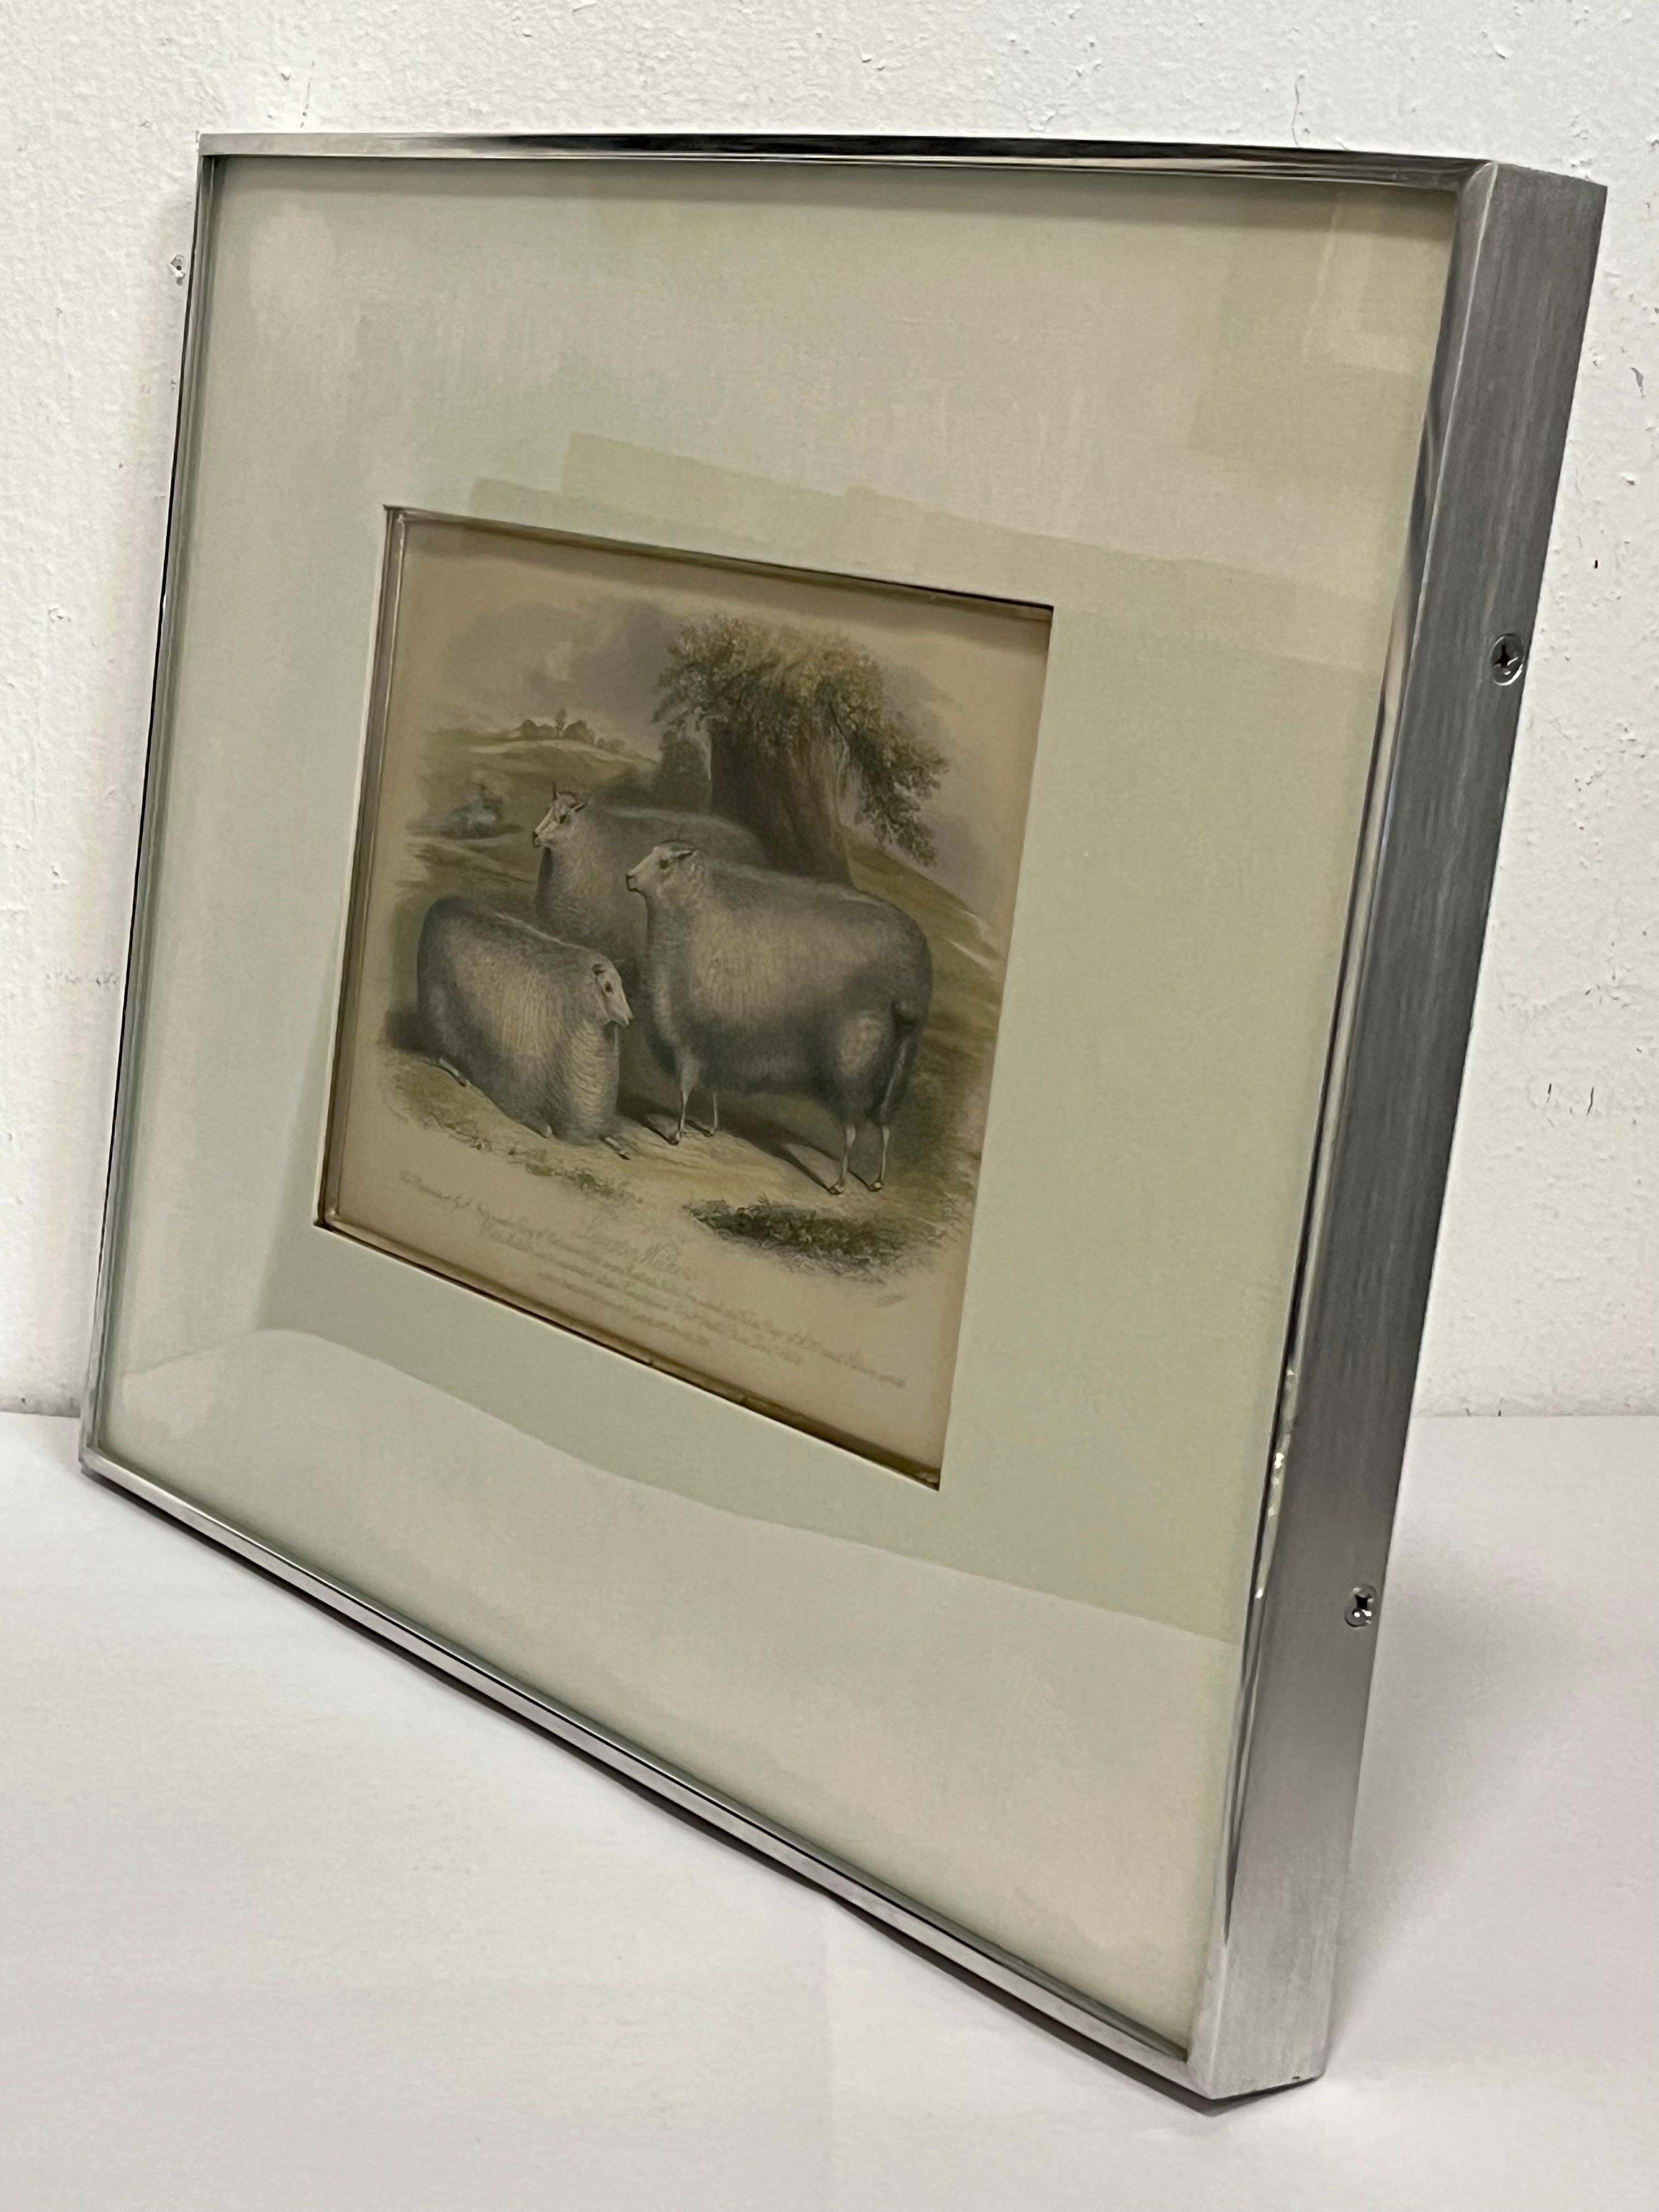 English 19th Century British Print by H. Stafford of Leicester Wethers in Kulicke Frame